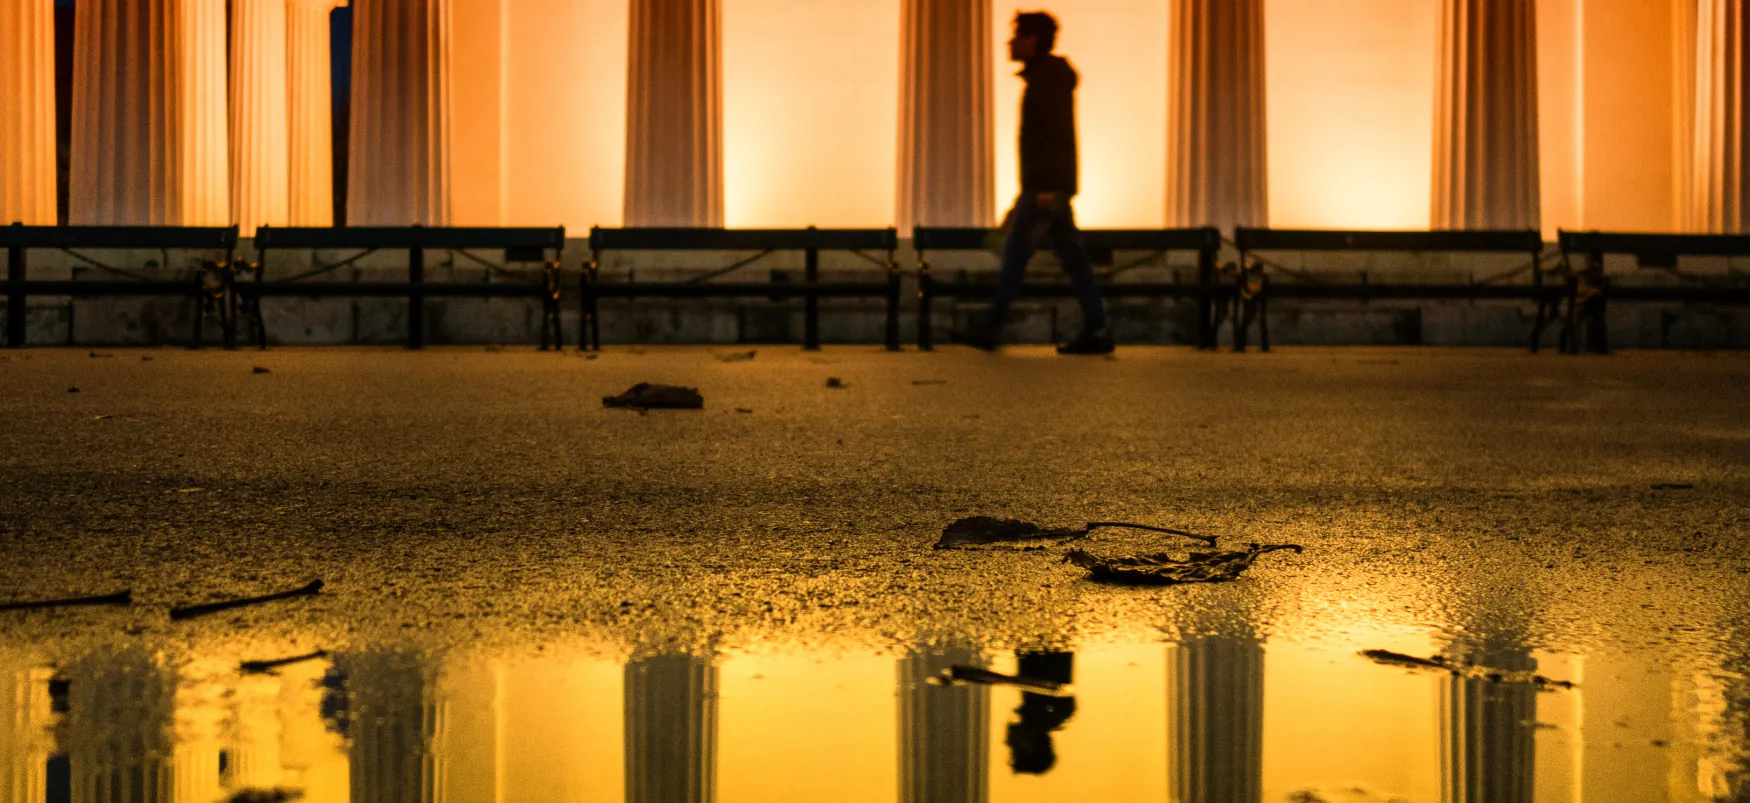 A person walking in front of a large building lined with marble columns. The person’s reflection is visible in a puddle in the foreground.